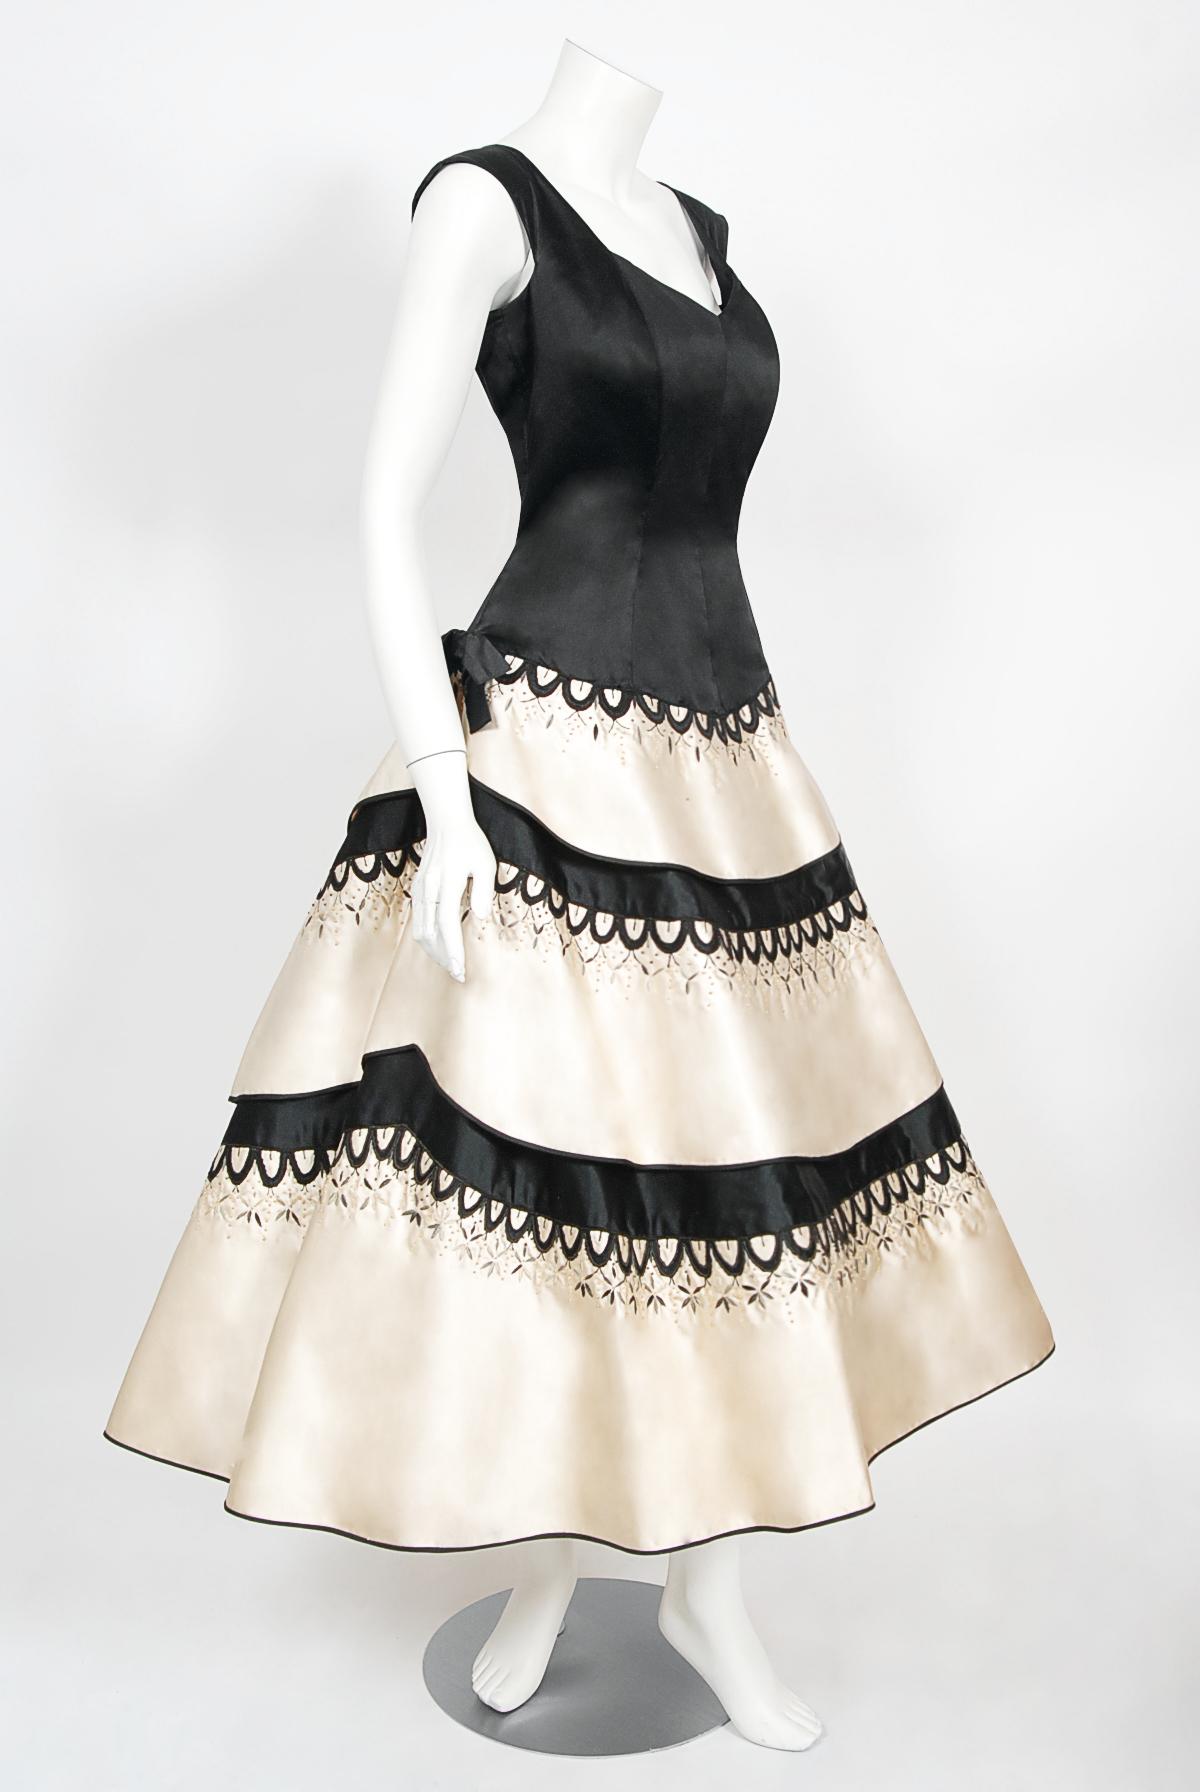 Vintage 1950's Emilio Schuberth Couture Black & Ivory Embroidered Satin Dress For Sale 1